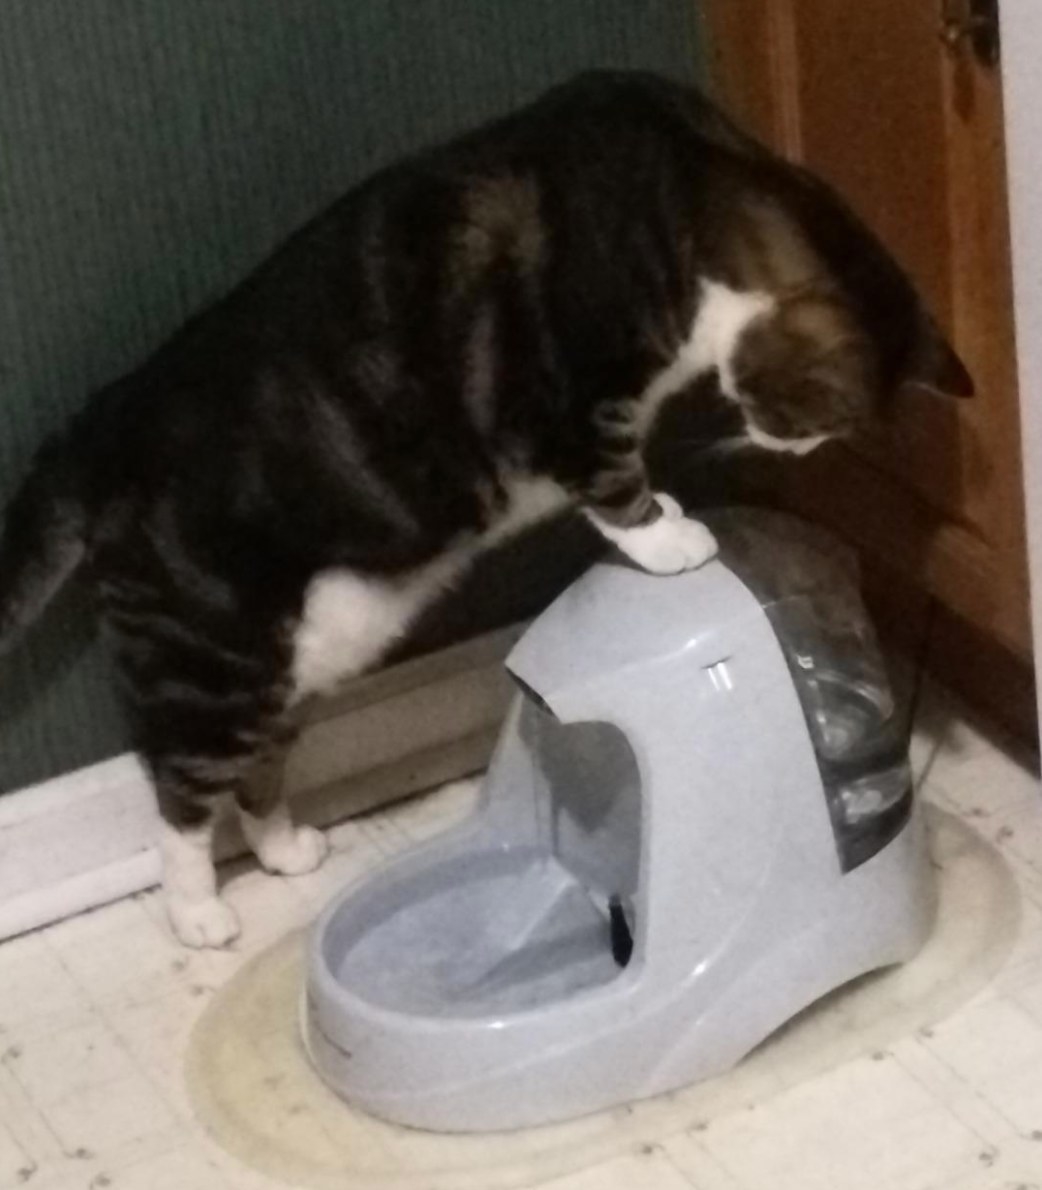 A reviewer&#x27;s image of their cat on the pet fountain